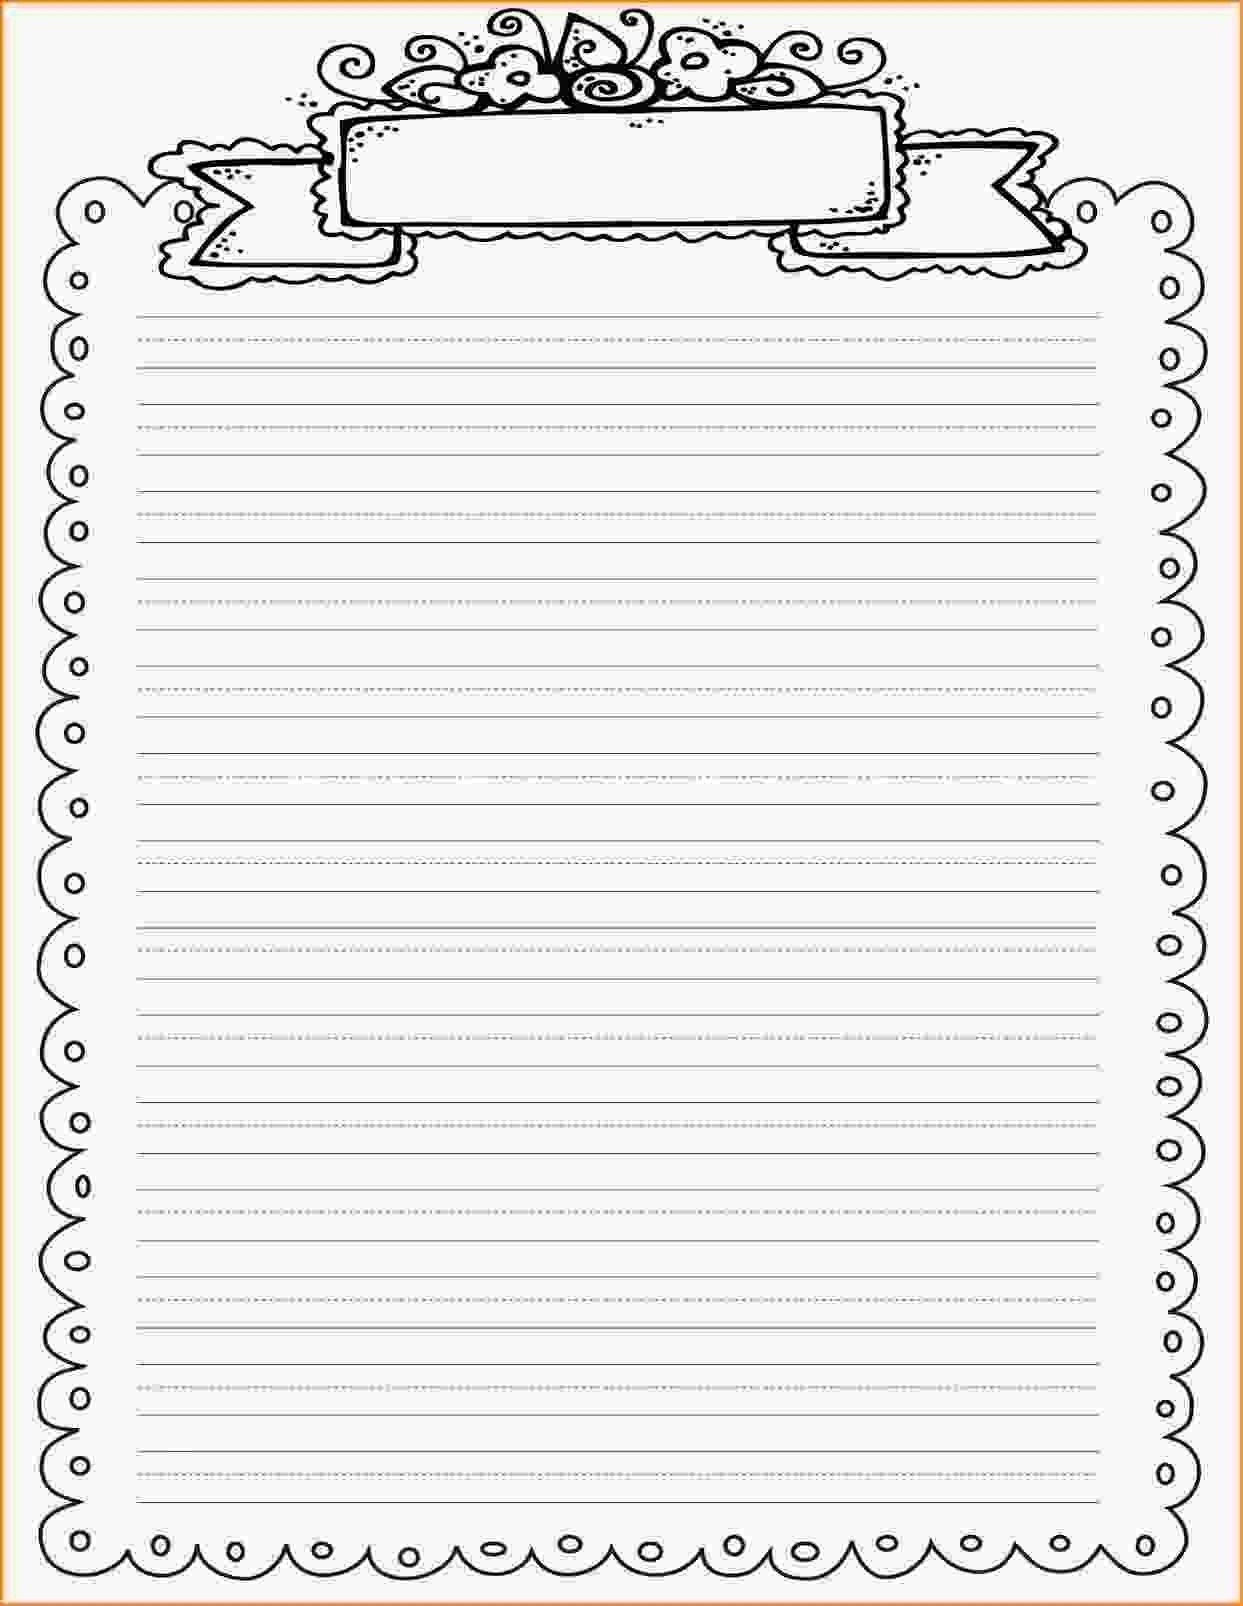 Decorative Border Lined Paper | Vectorborders - Free Printable Writing Paper With Borders